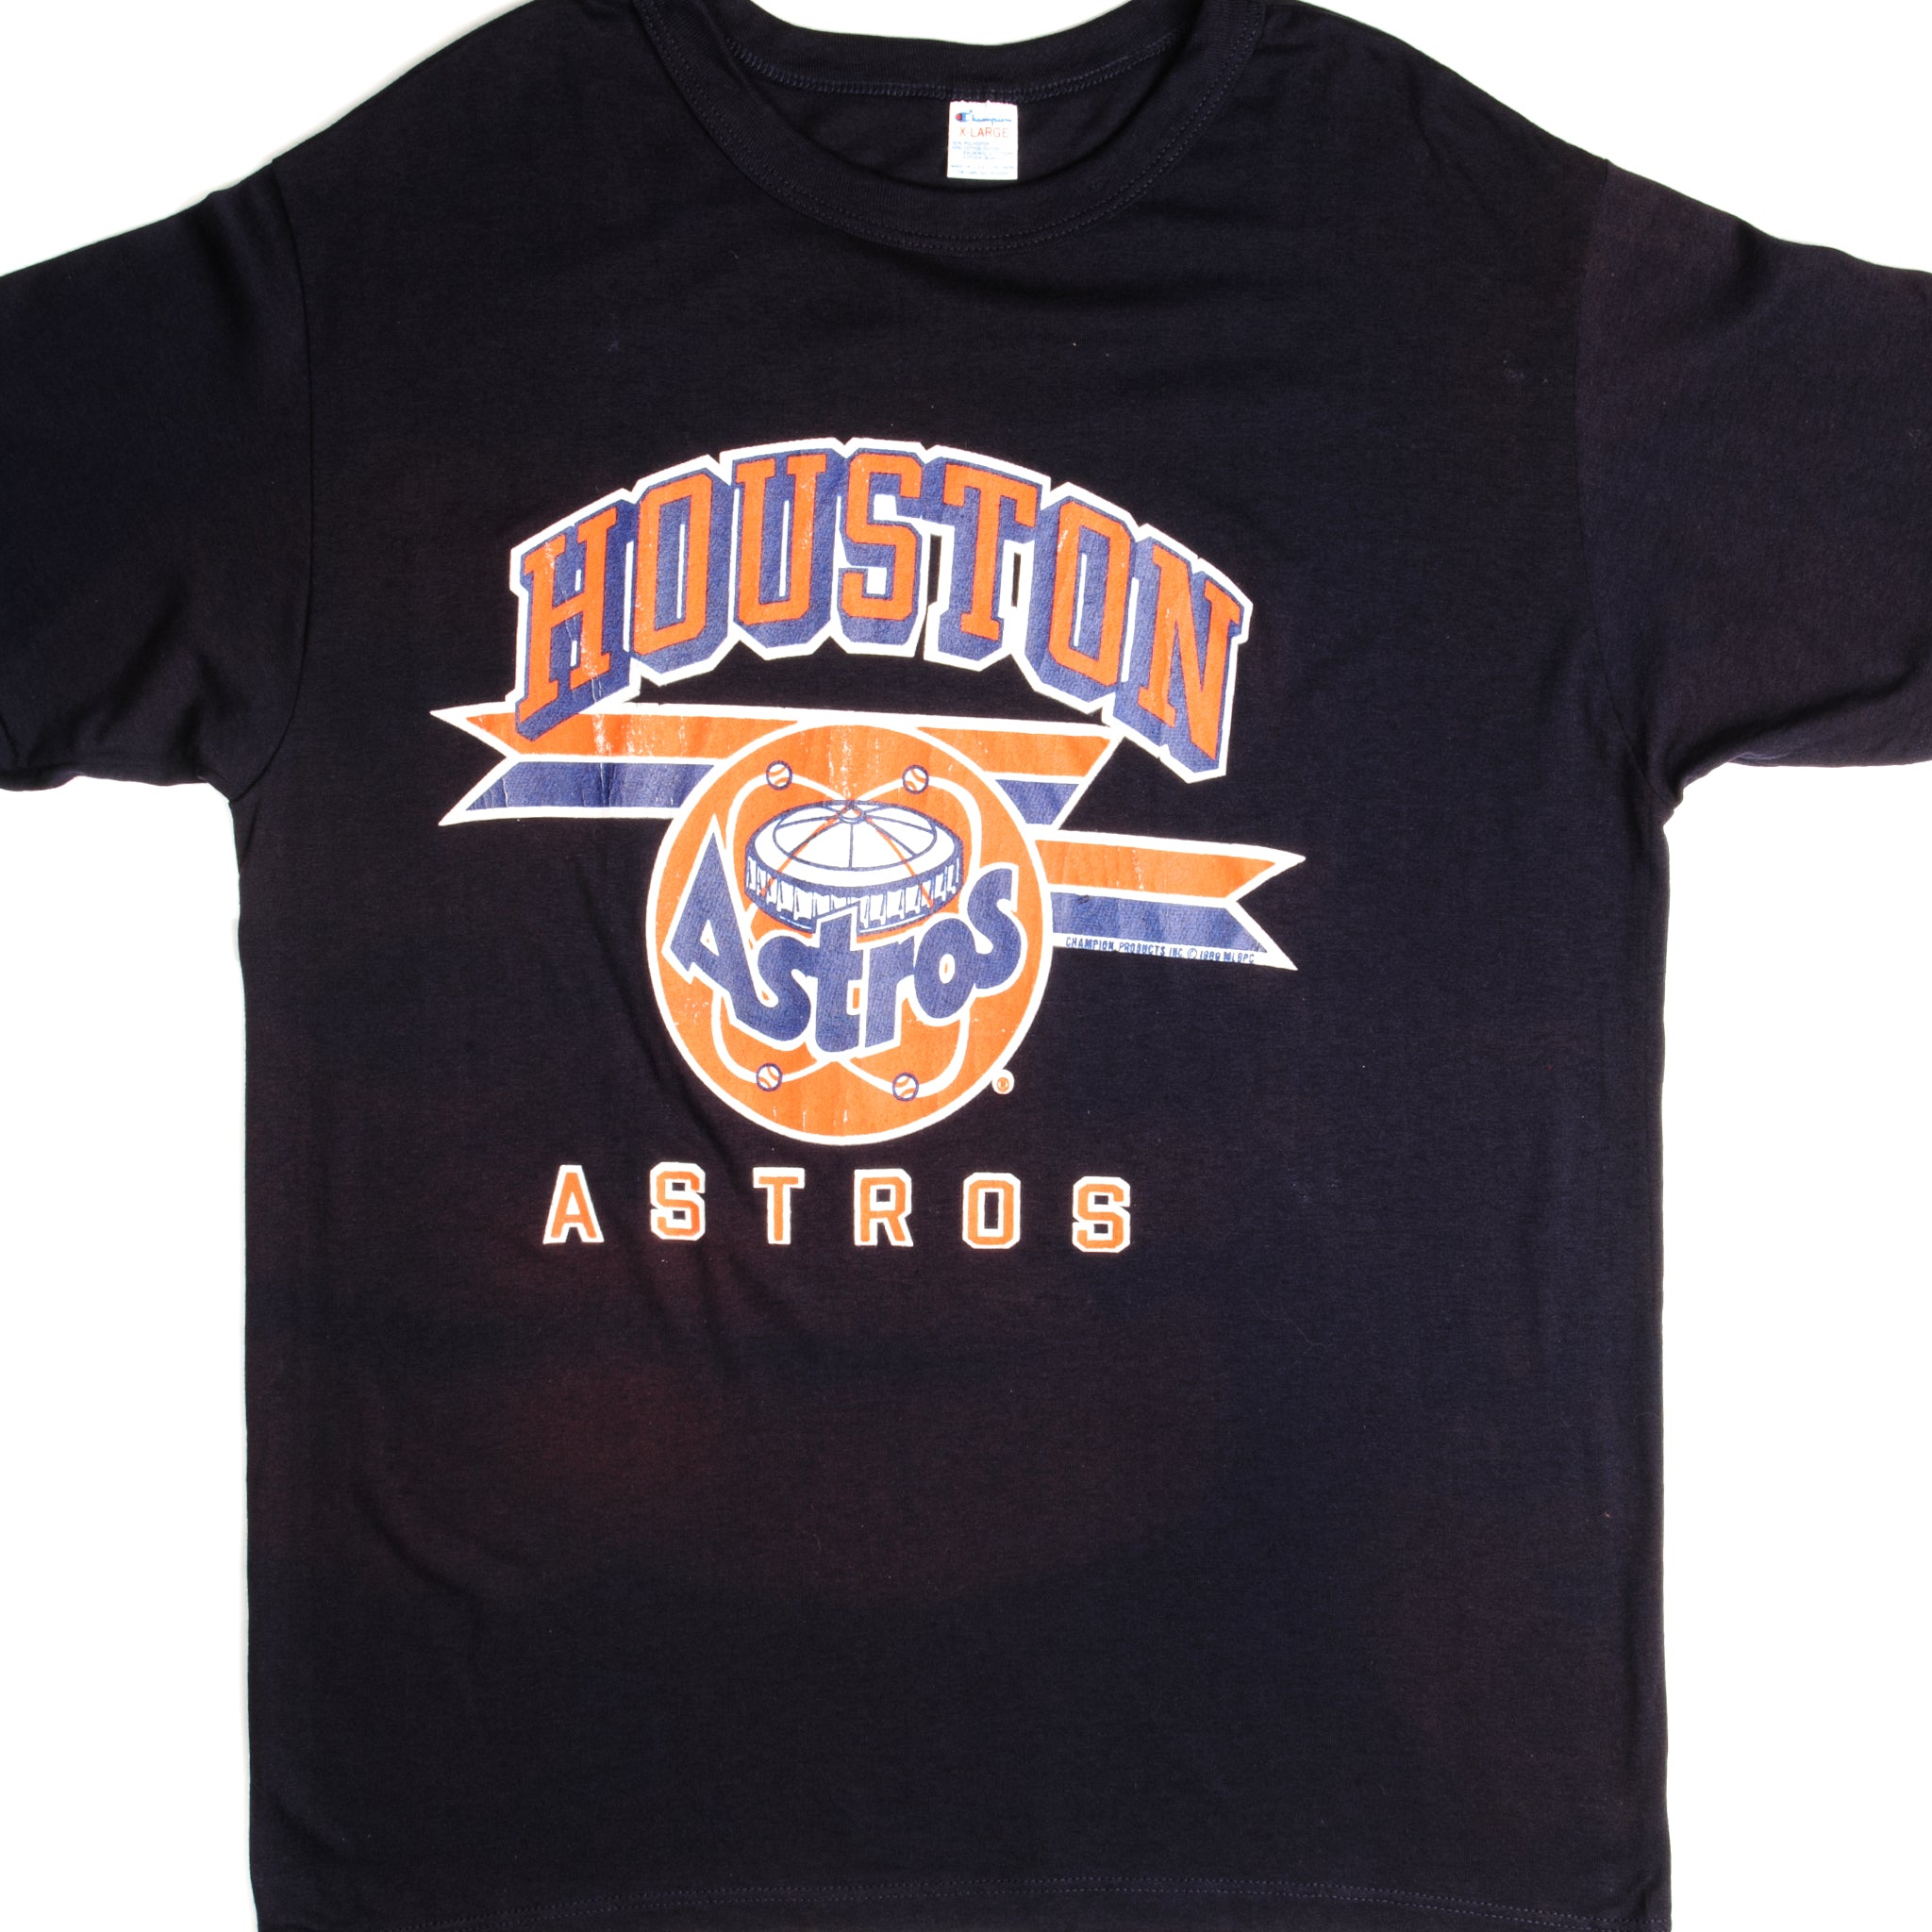 astros shirt for sale